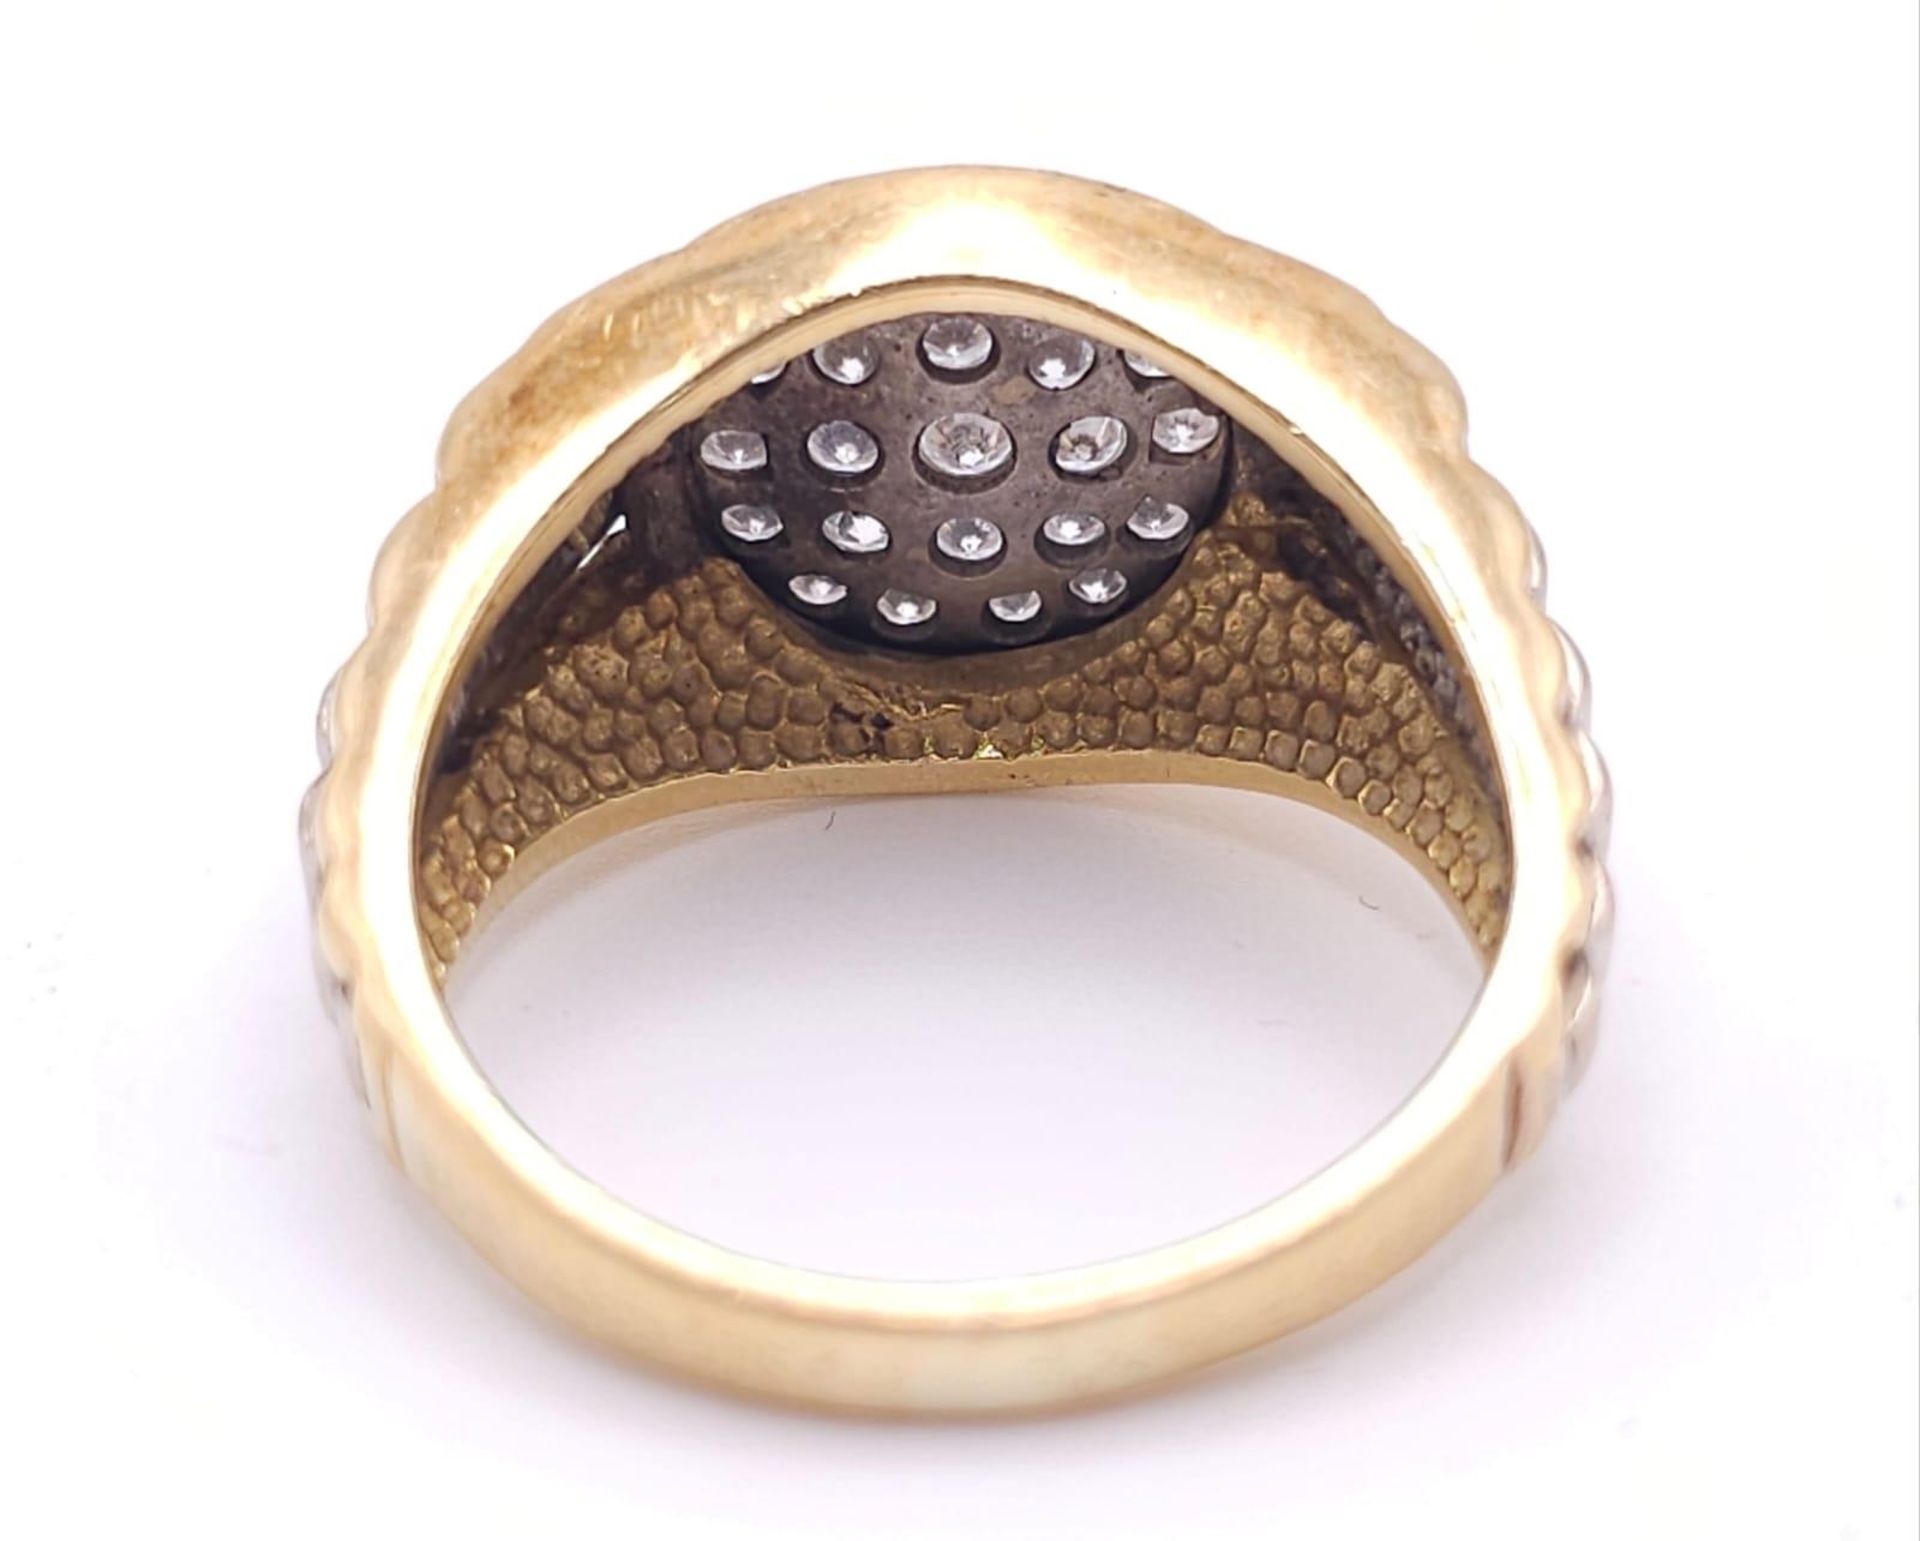 AN IMPRESSIVE 18K 2 COLOUR GOLD DIAMOND SET RING INSPIRED BY THE ROLEX DESIGN, APPROX 0.50CT - Image 8 of 14